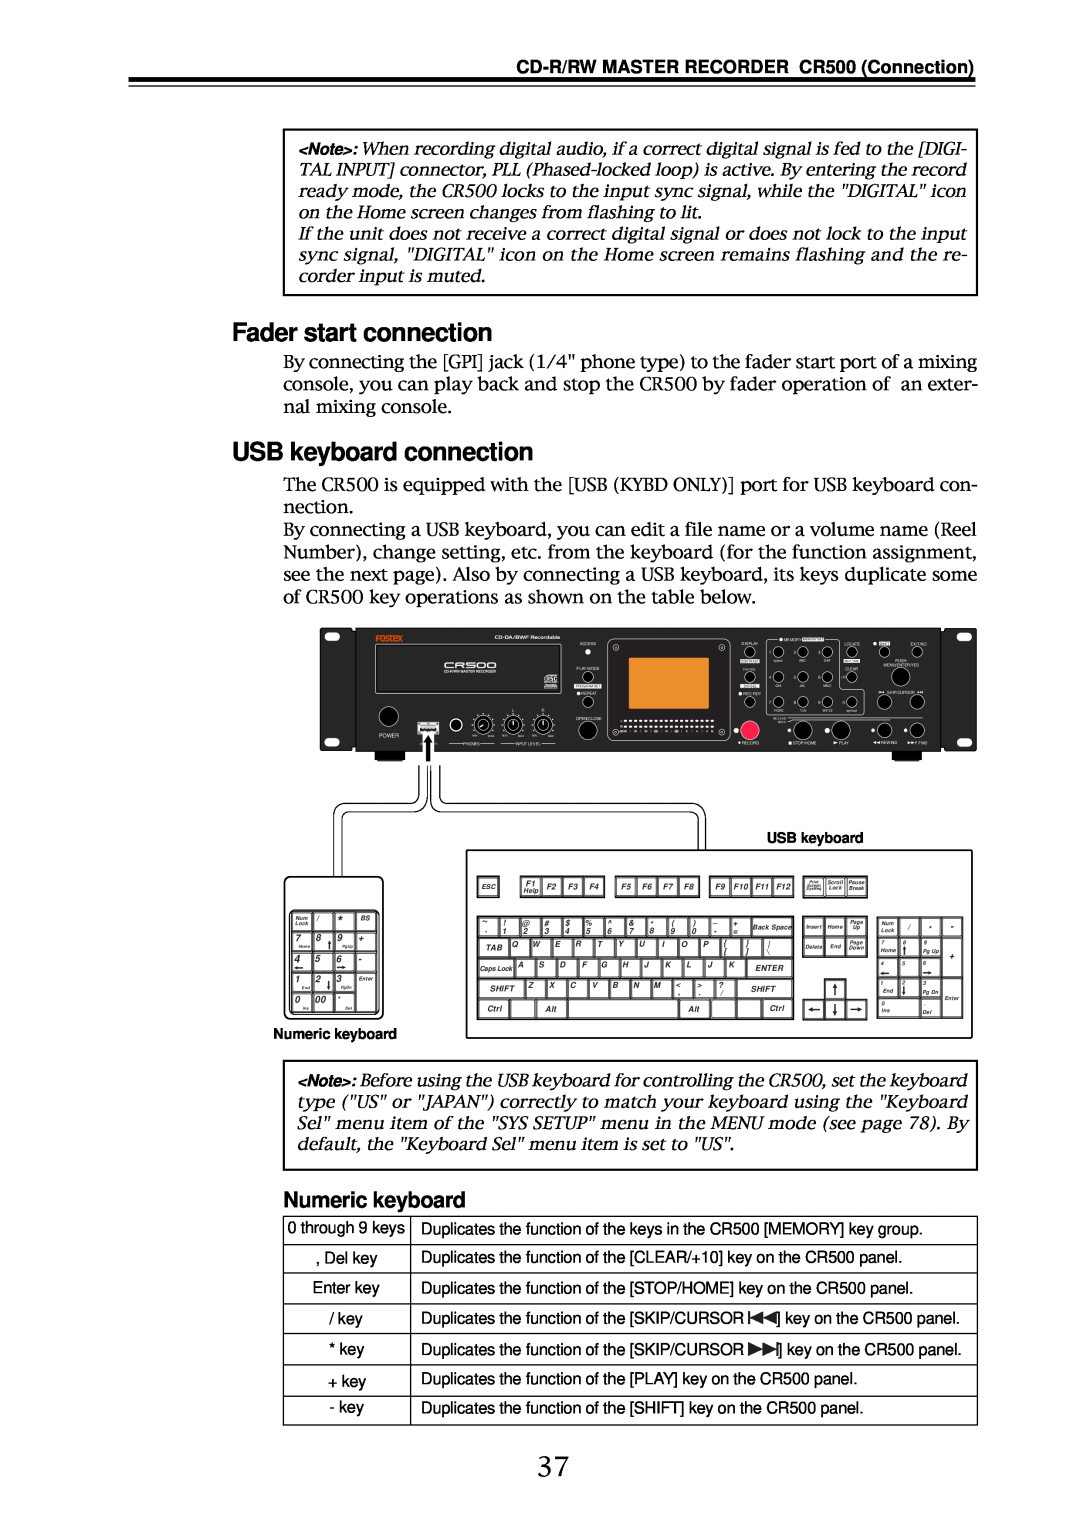 Fostex Fader start connection, USB keyboard connection, Numeric keyboard, CD-R/RWMASTER RECORDER CR500 Connection 